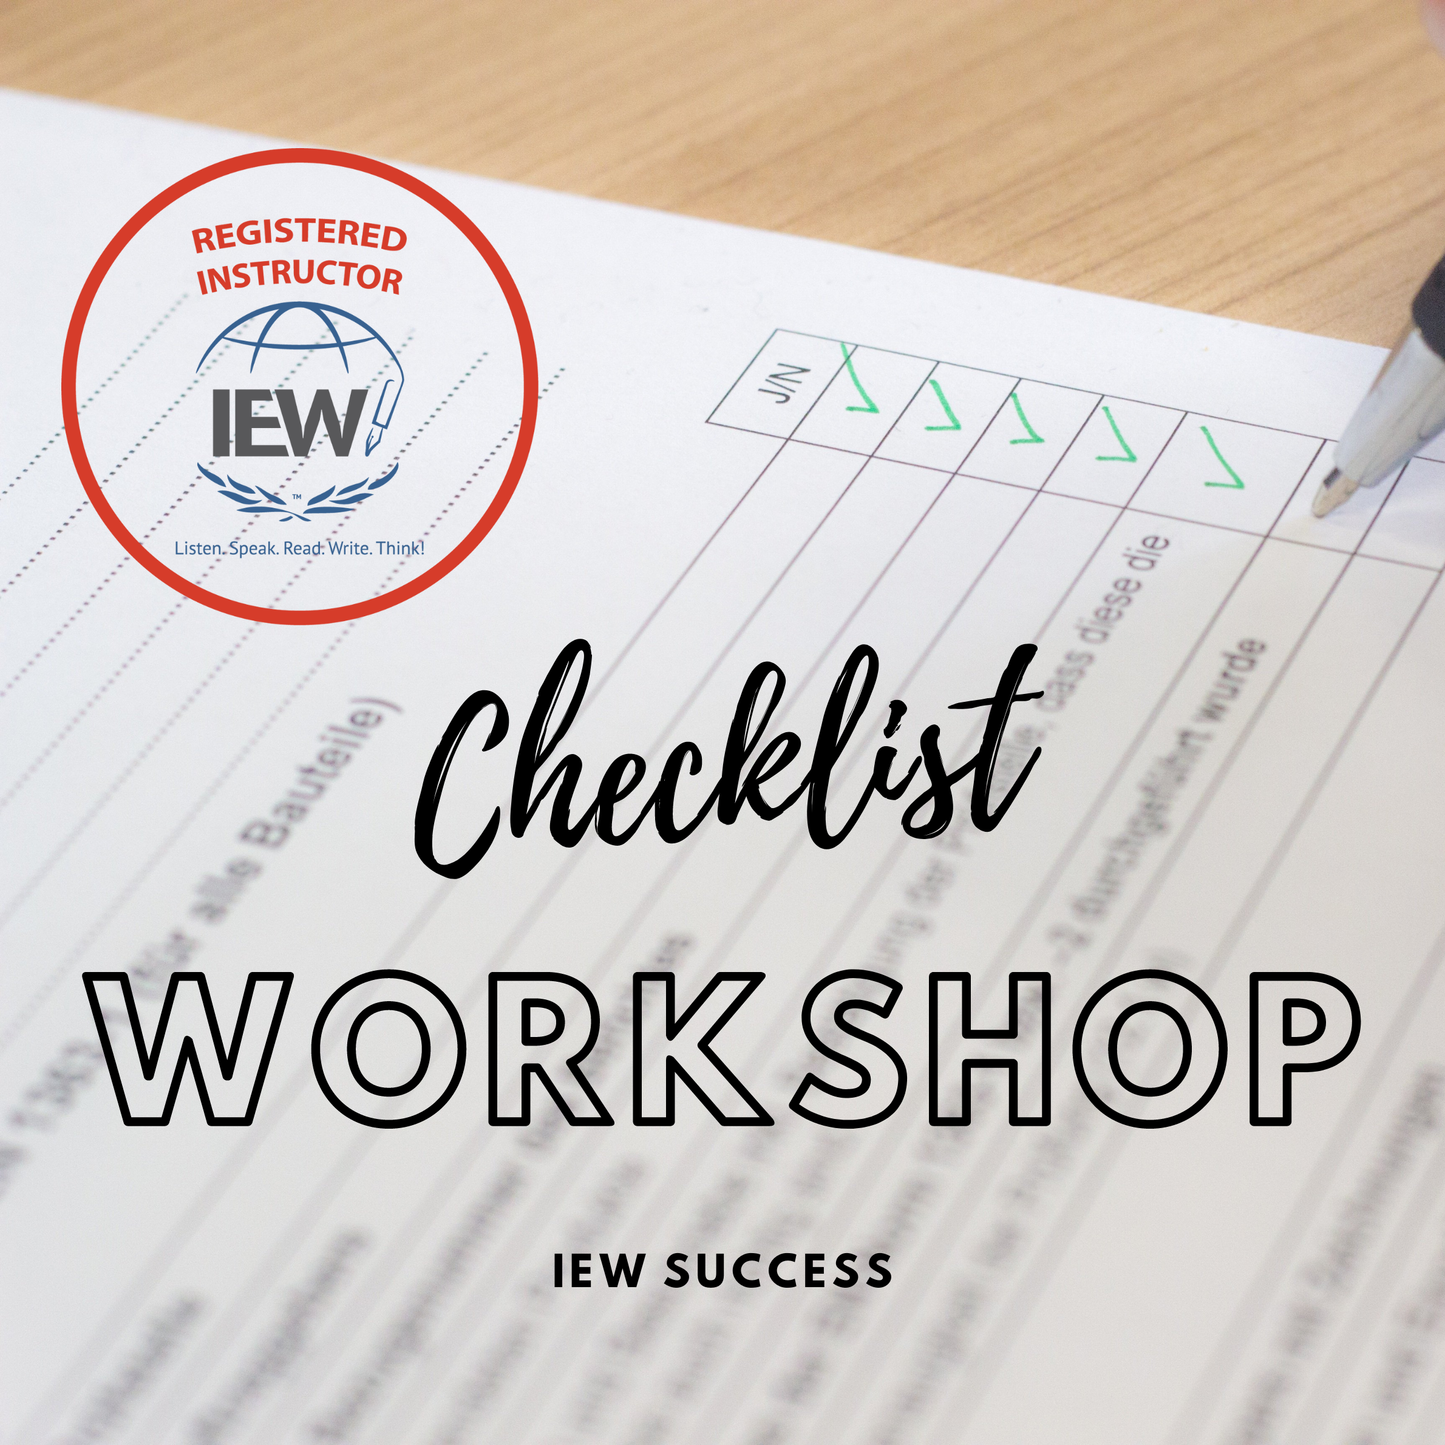 IEW Checklist Workshops, Level A Review, 2023-2024 academic year, Fridays, 9 CST